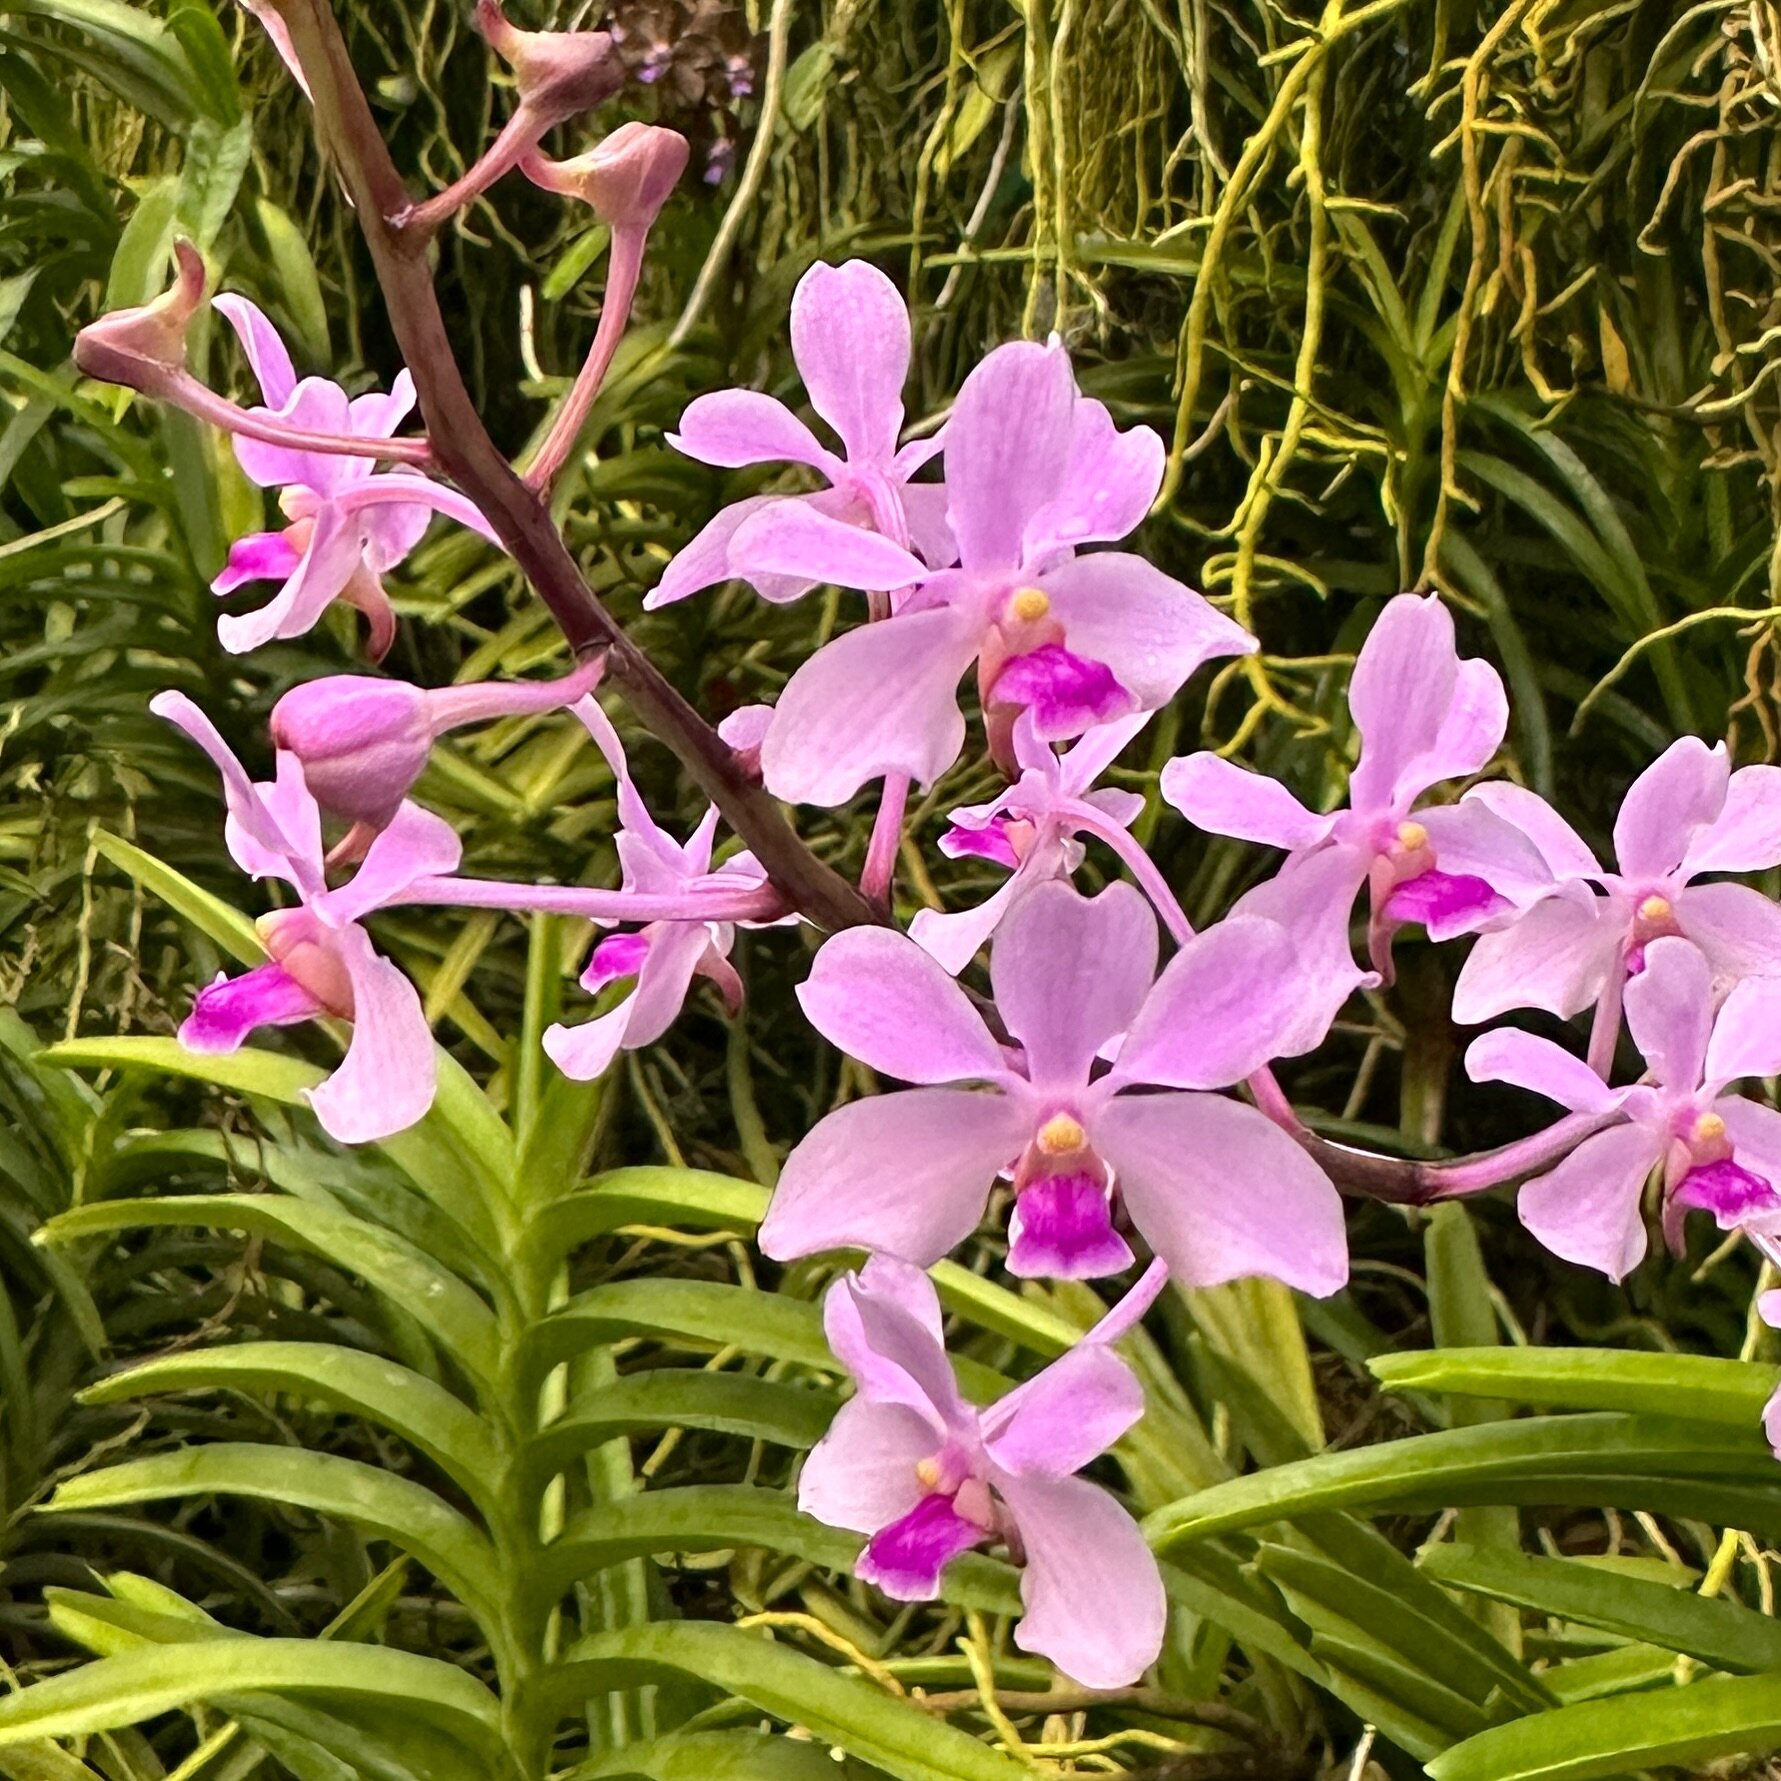 Vanda coerulescens f2 (2686), beautiful line bred pink coerulescens available now. Visit MotesOrchids.com (link in bio) for this and other species on sale now. 

Want to help us grow? Click &ldquo;follow&rdquo; then share the posts that make you go w